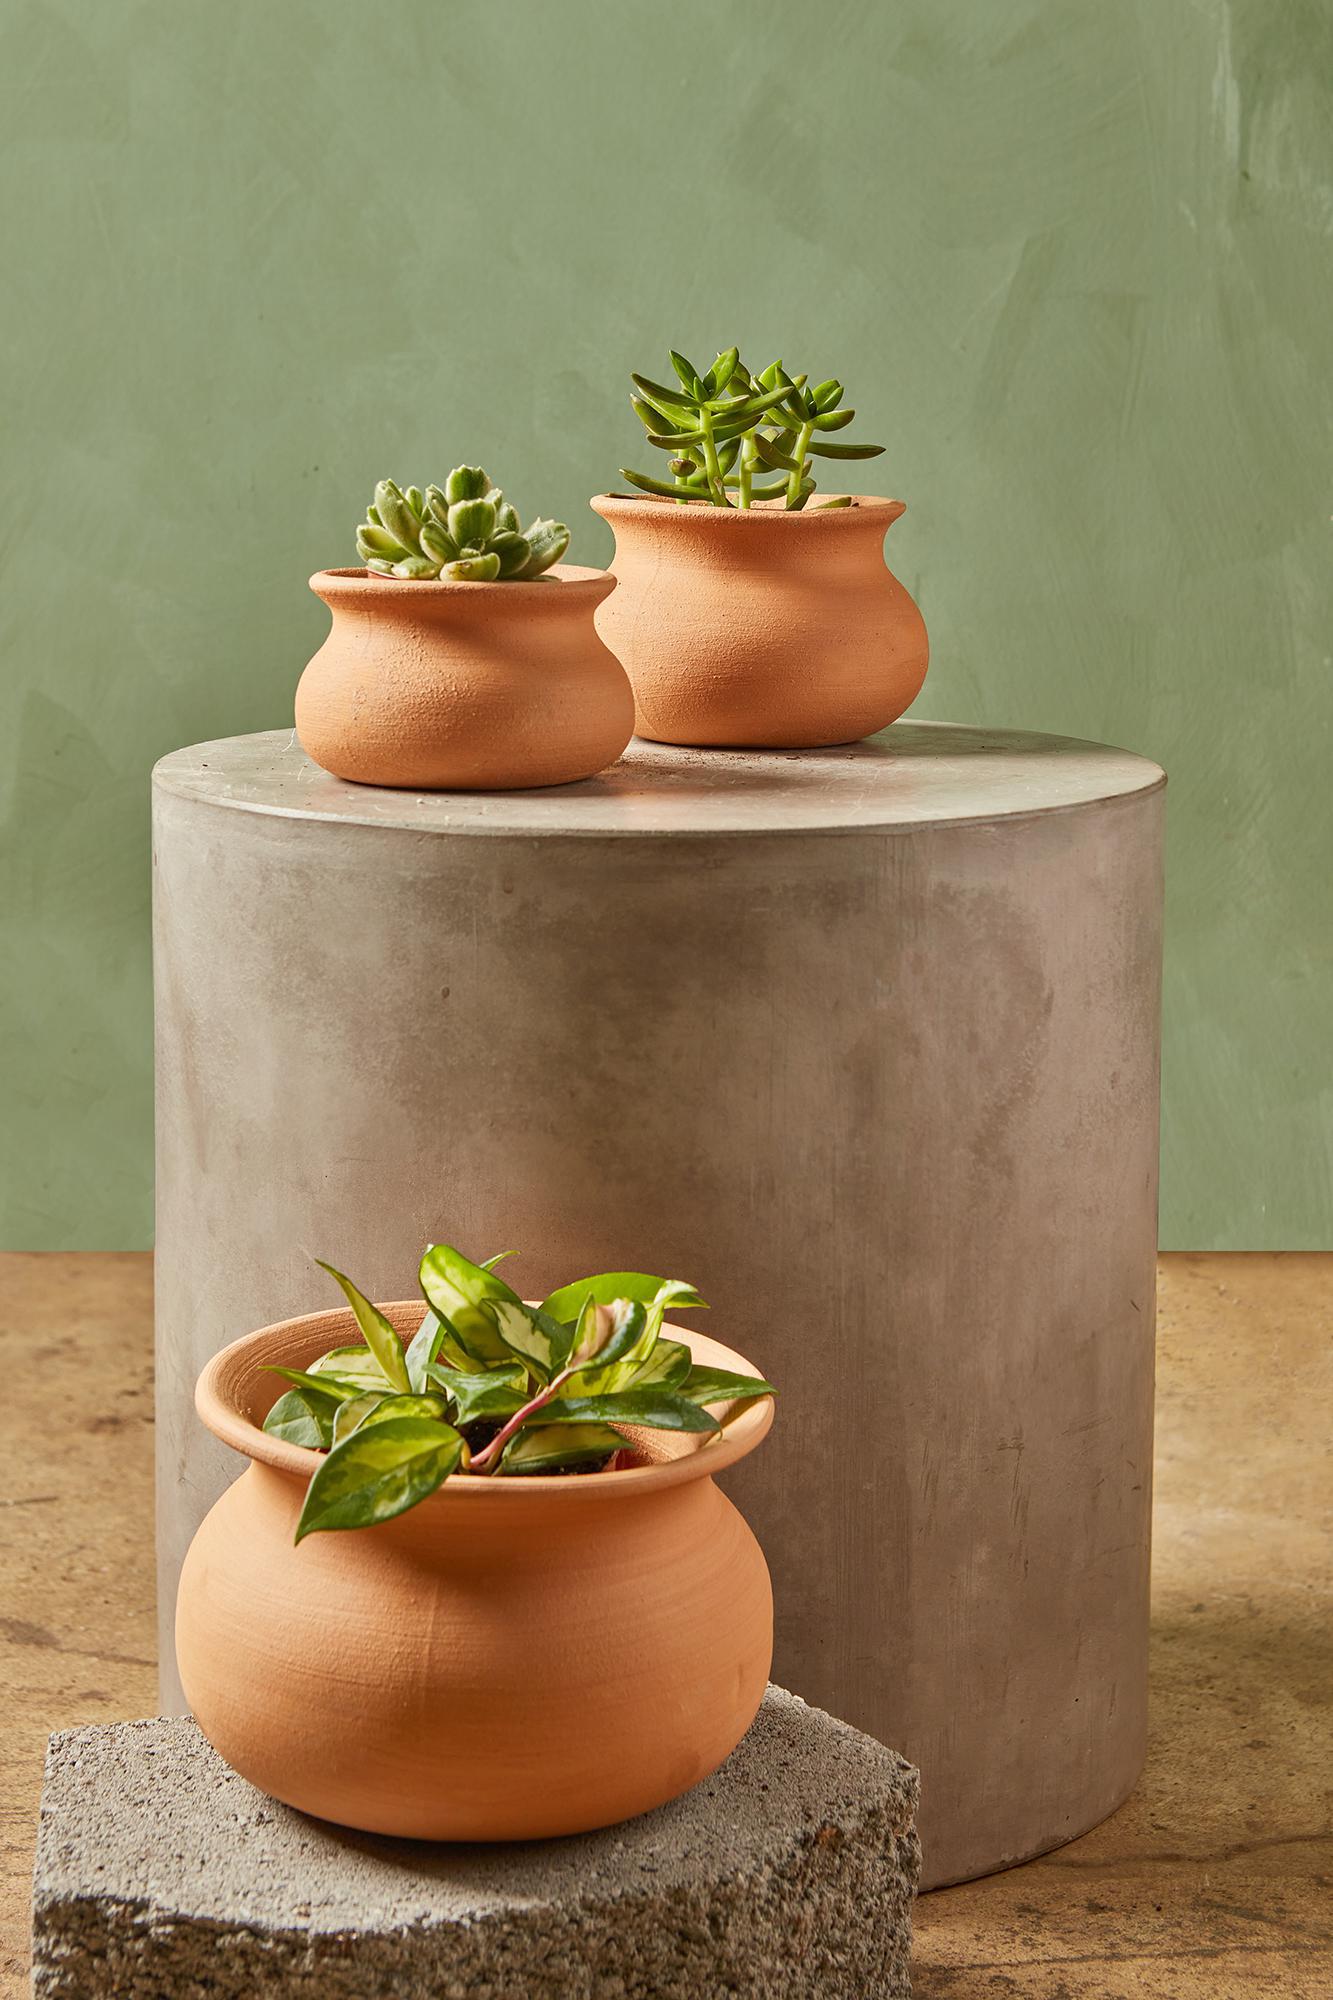 Small Terracotta Cylinder Pot and Saucer